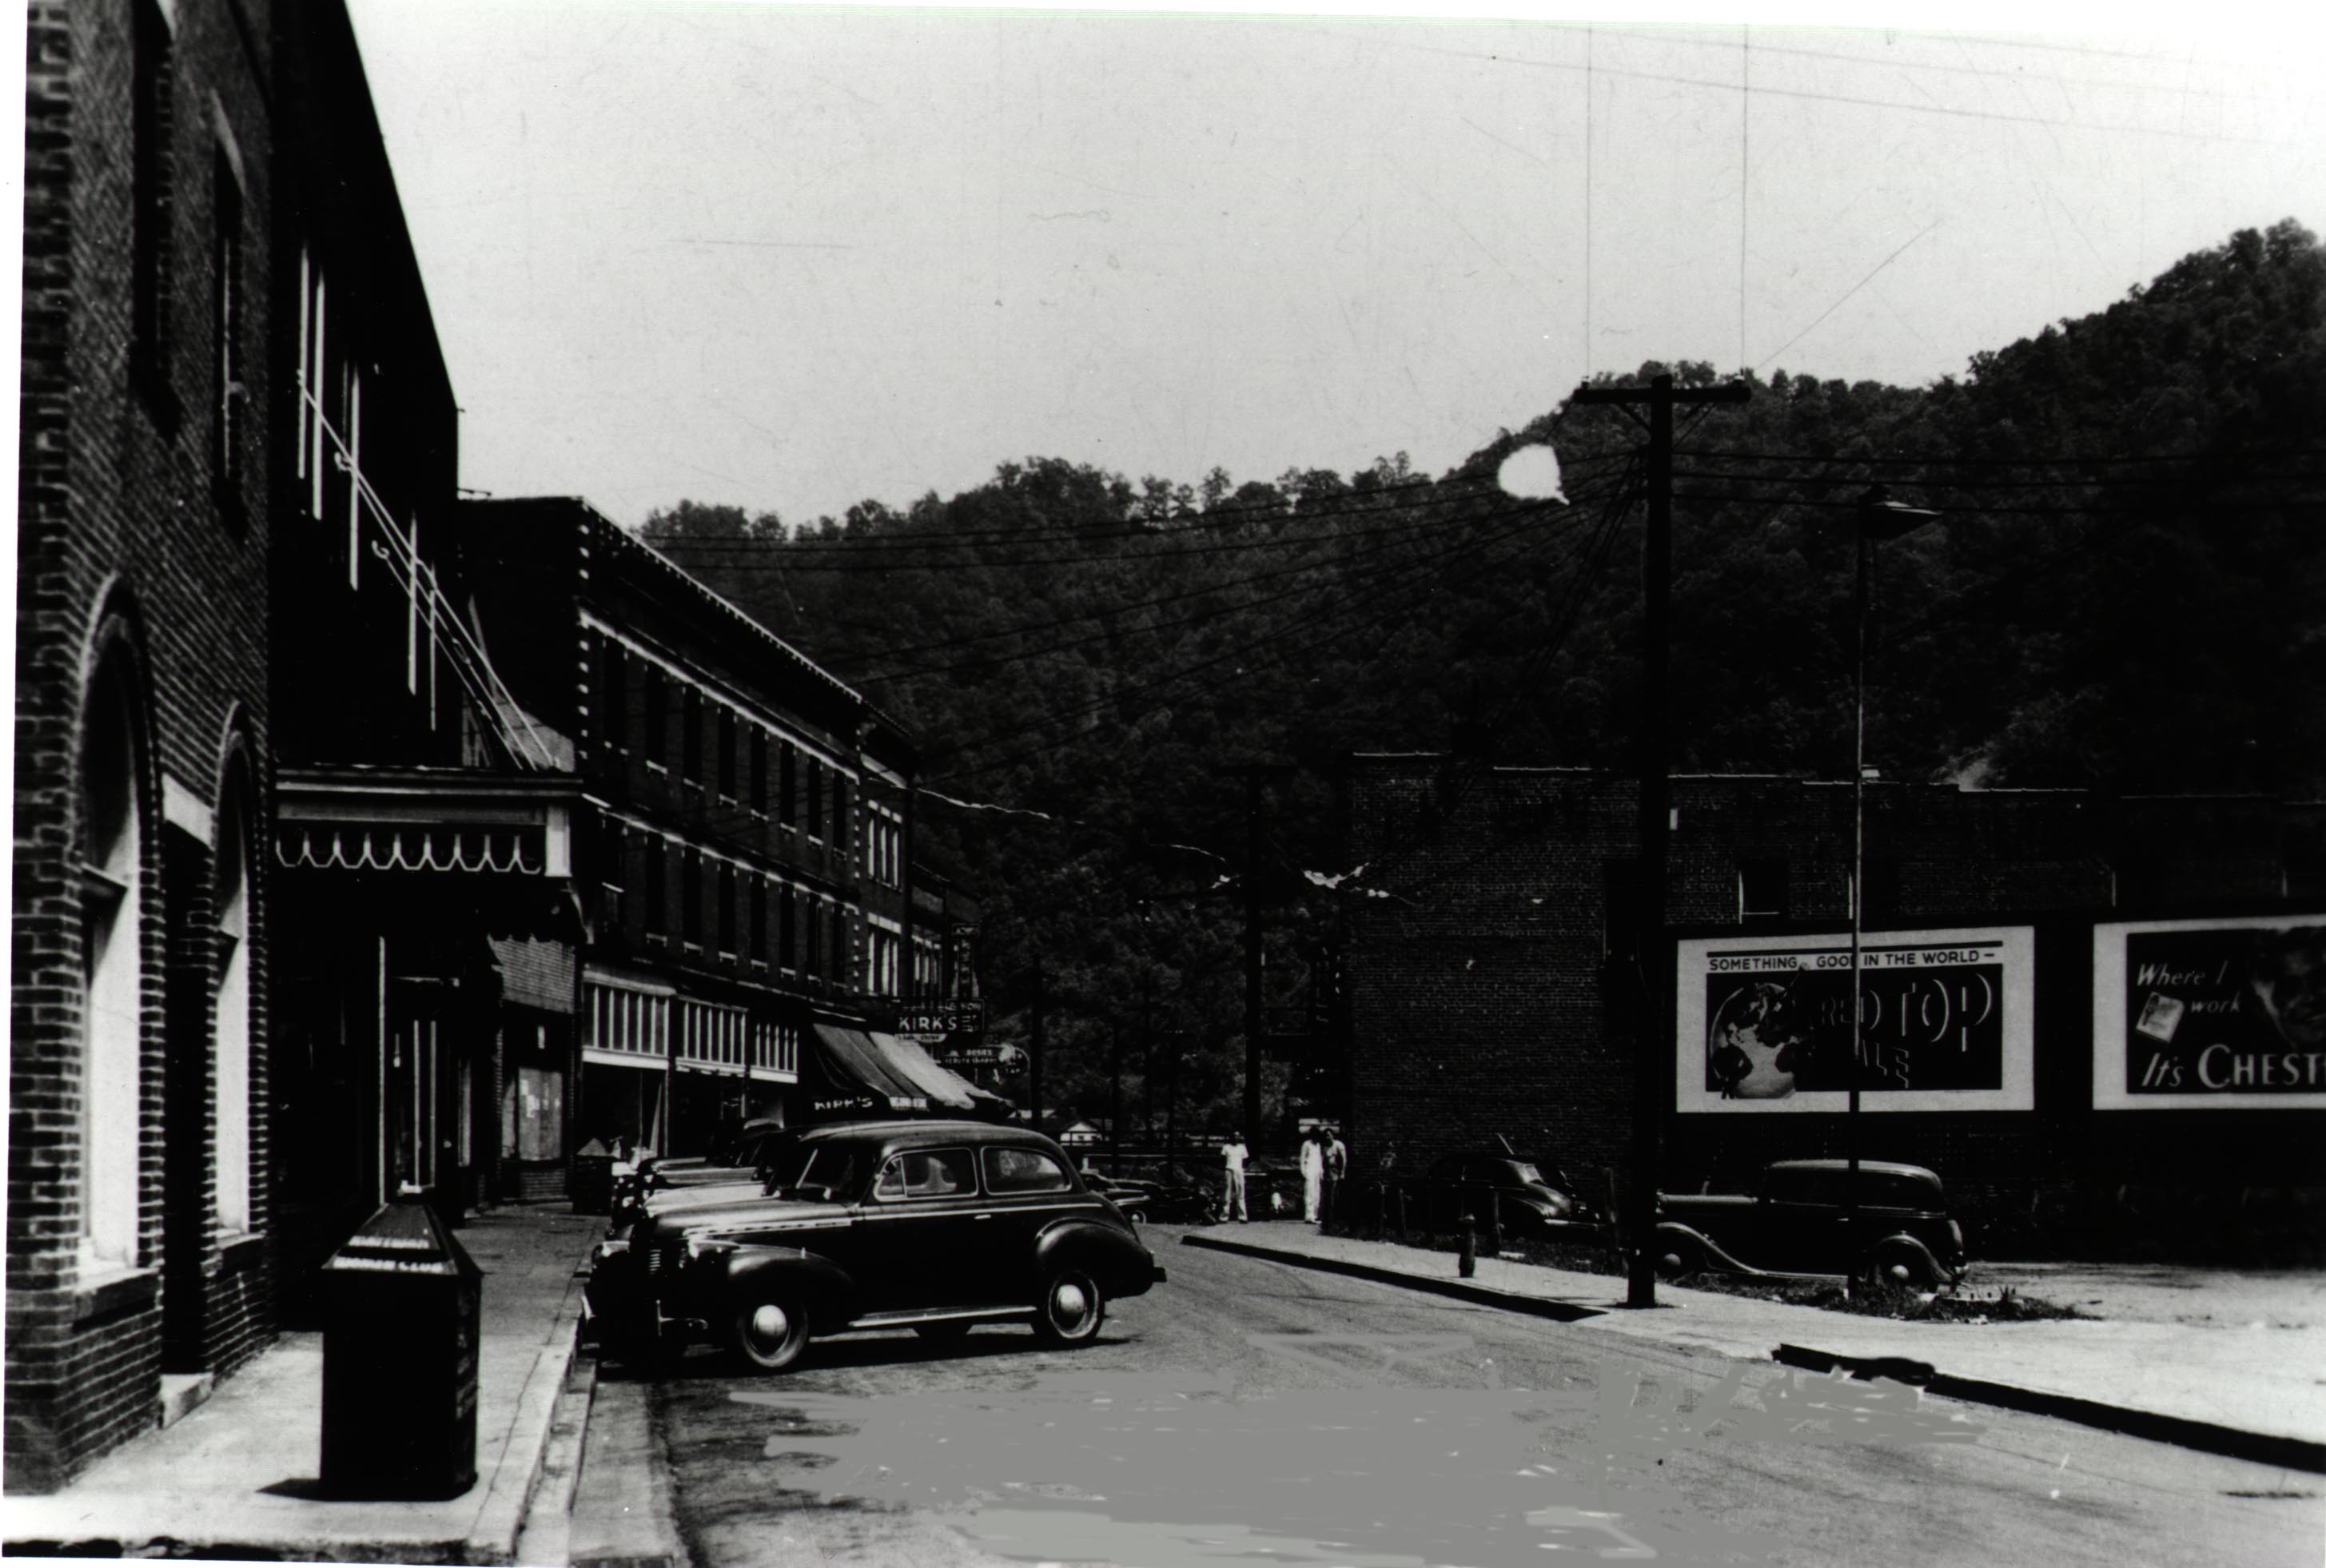 Matewan in the early 40's